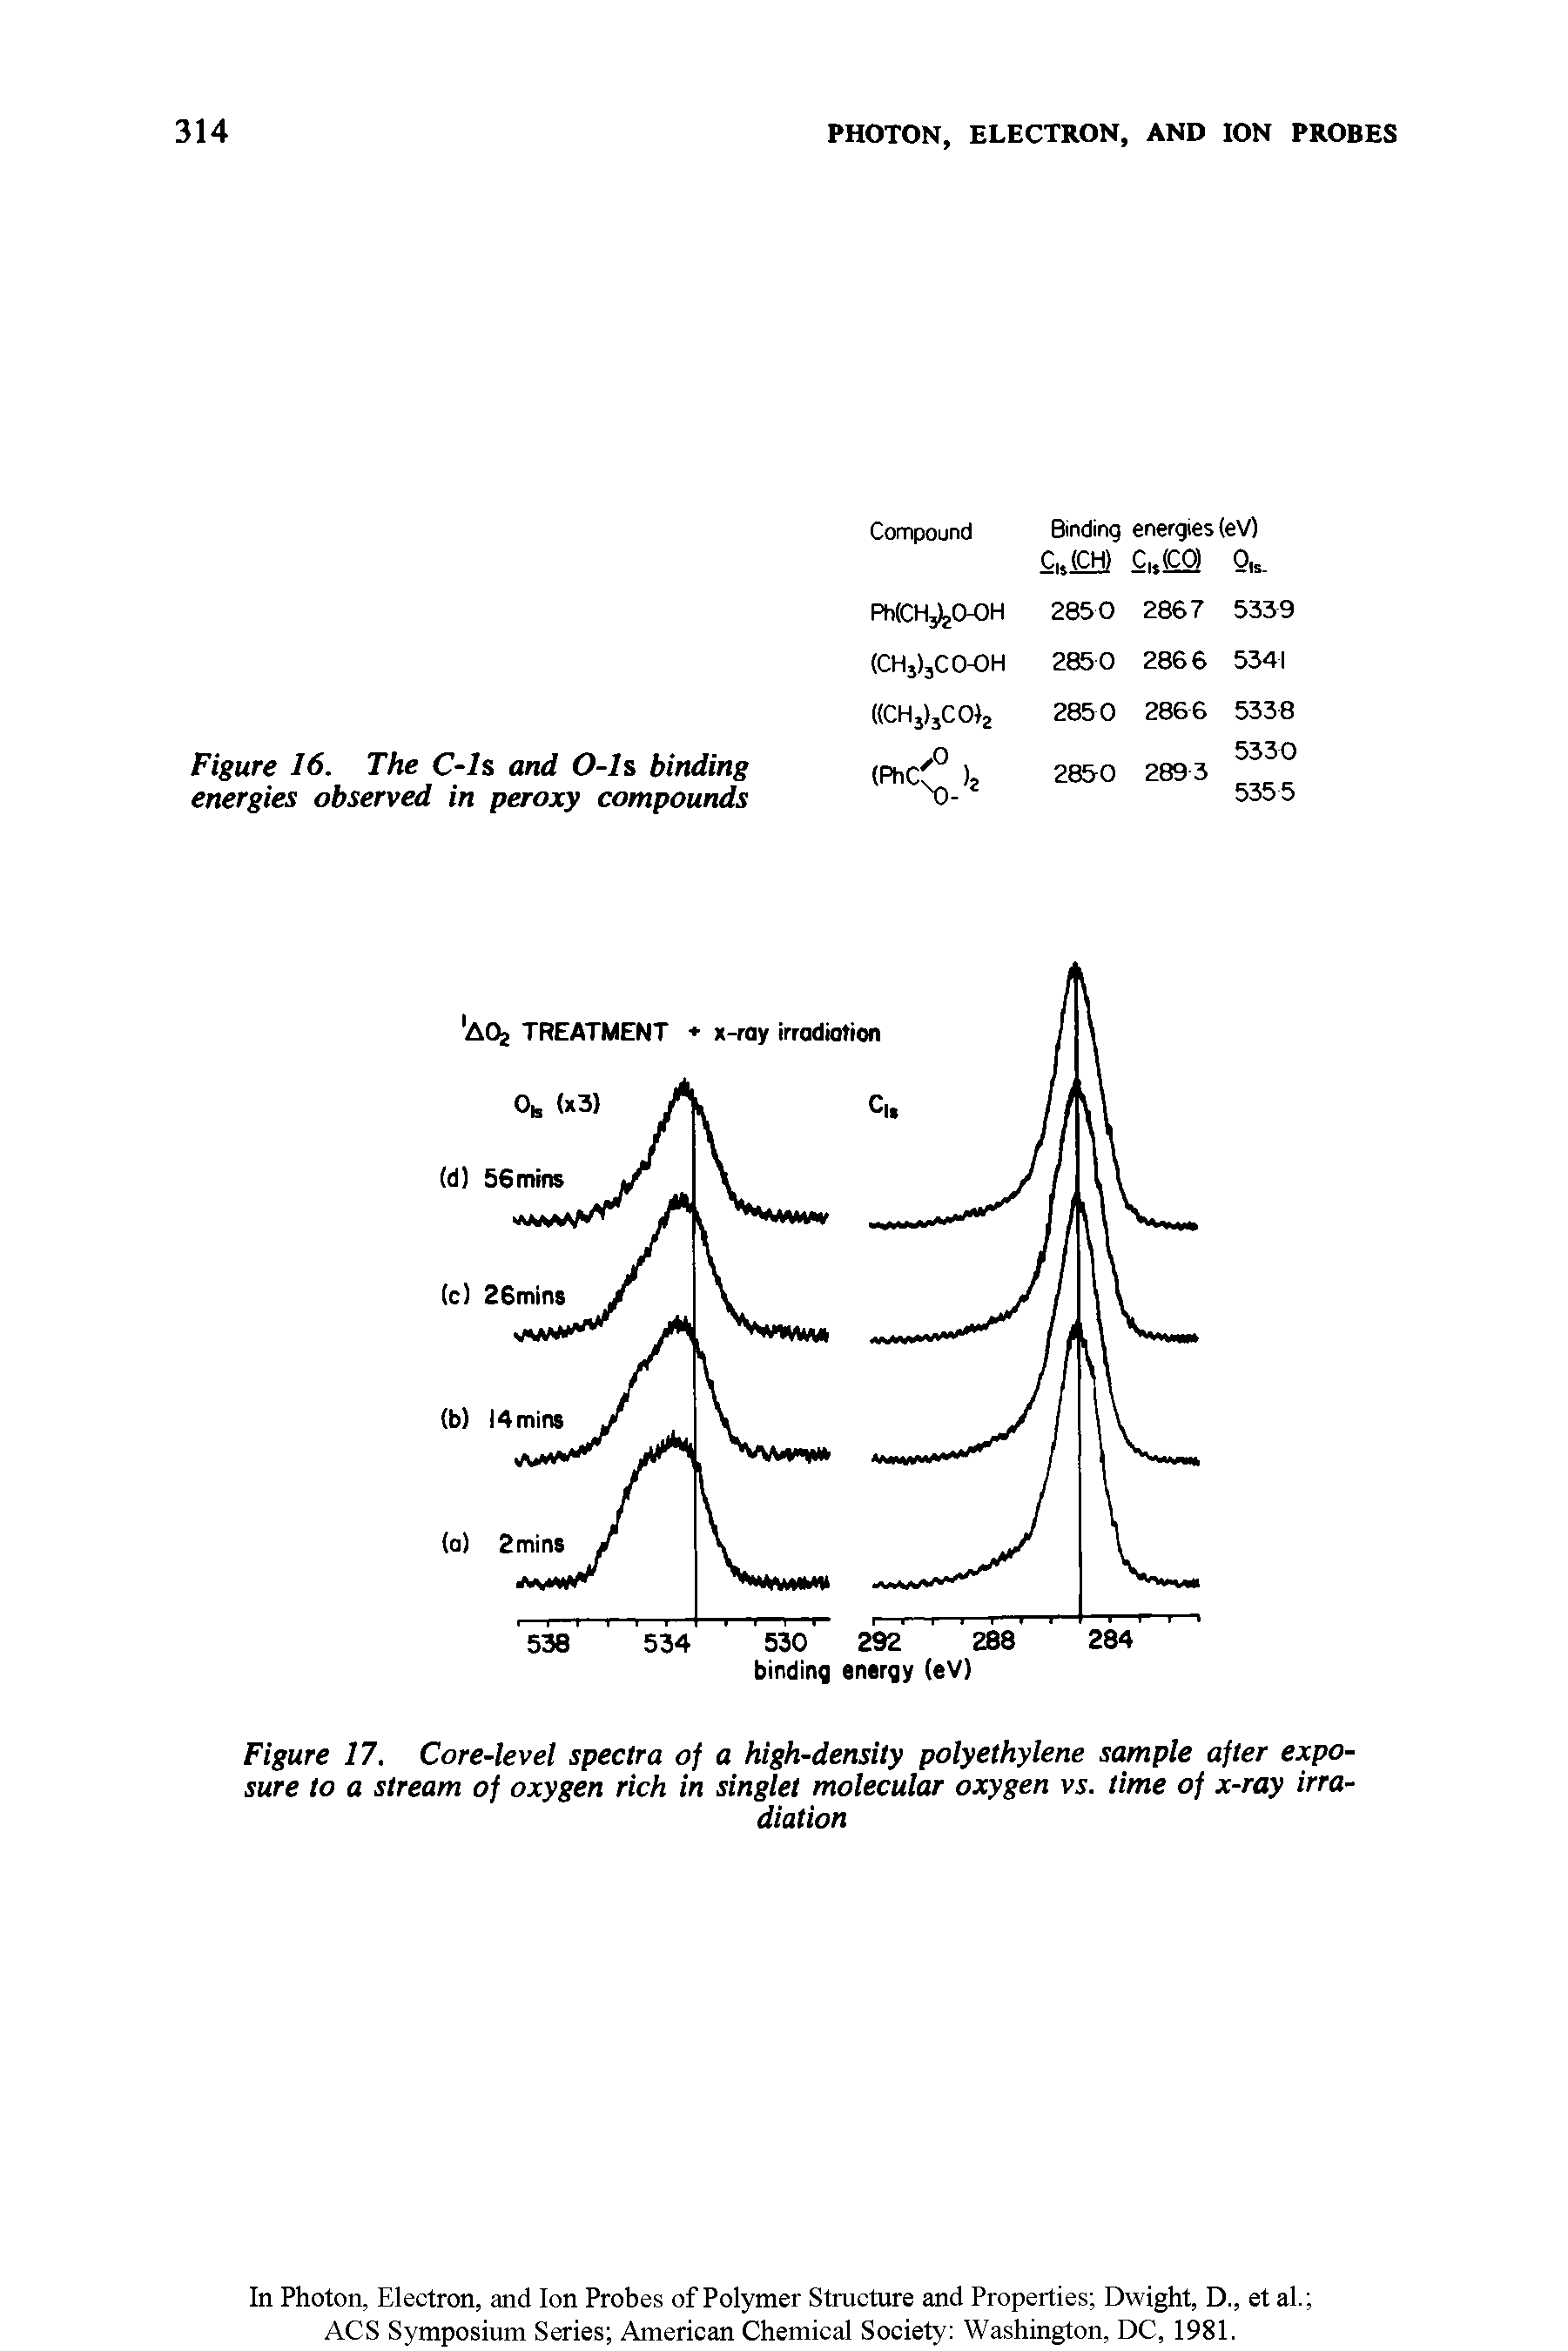 Figure 17. Core-level spectra of a high-density polyethylene sample after exposure to a stream of oxygen rich in singlet molecular oxygen vs. time of x-ray irradiation...